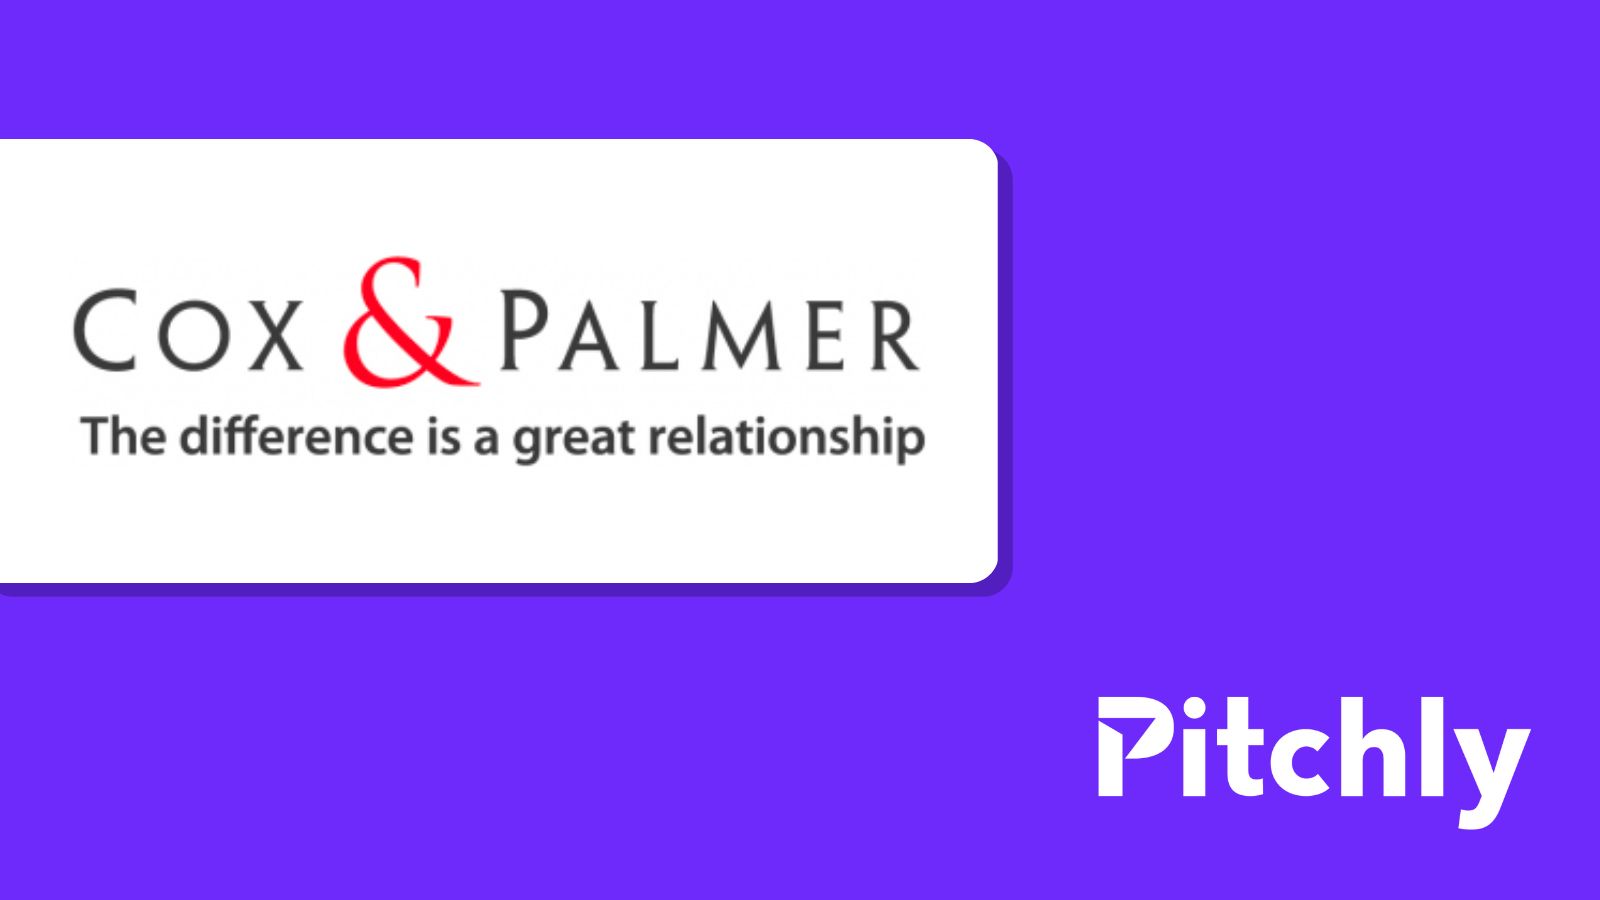 Cox and palmer pitchly client story